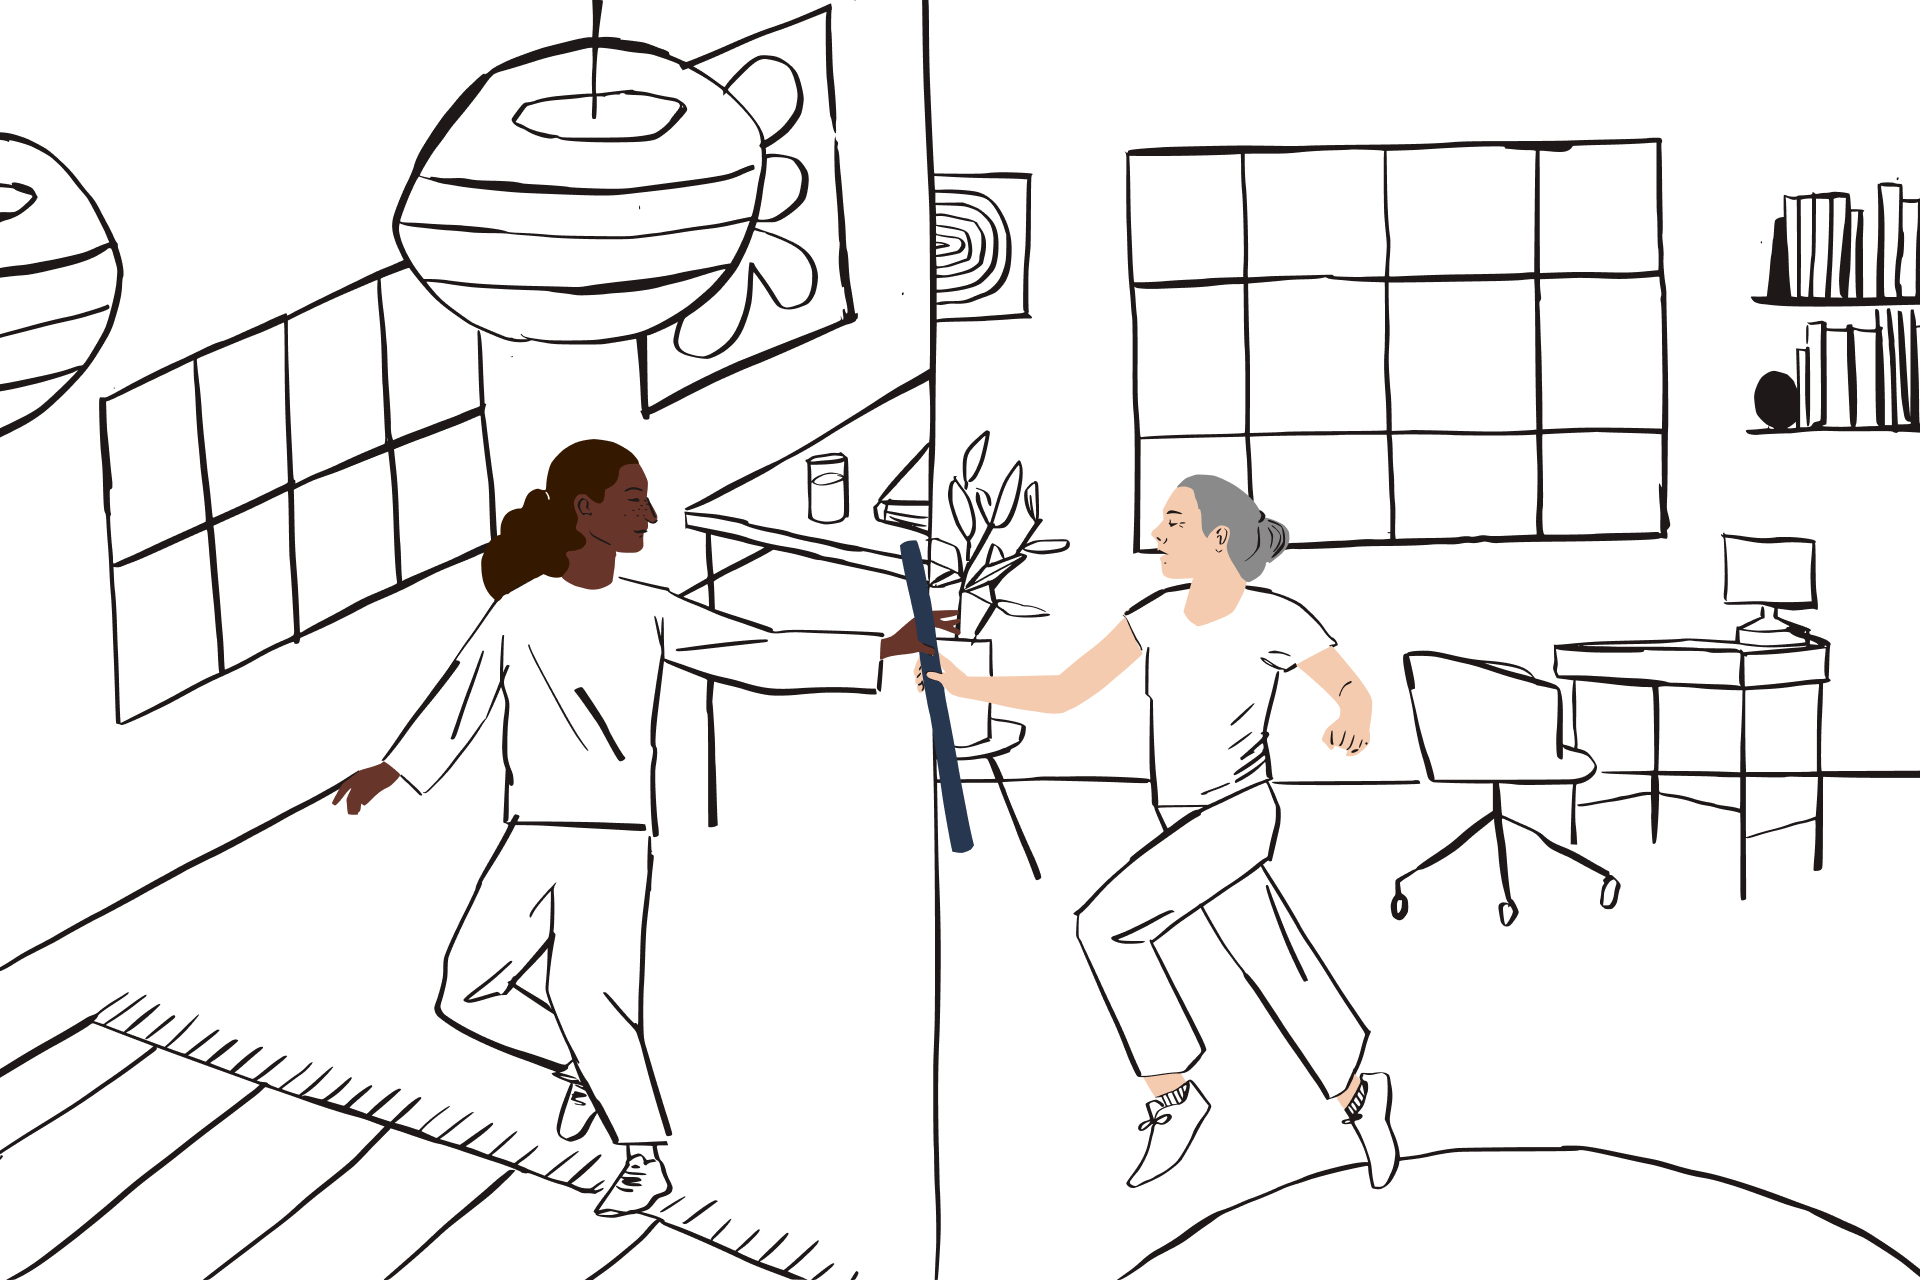 Line illustration of a person passing a baton from a home office frame to a person in an different space